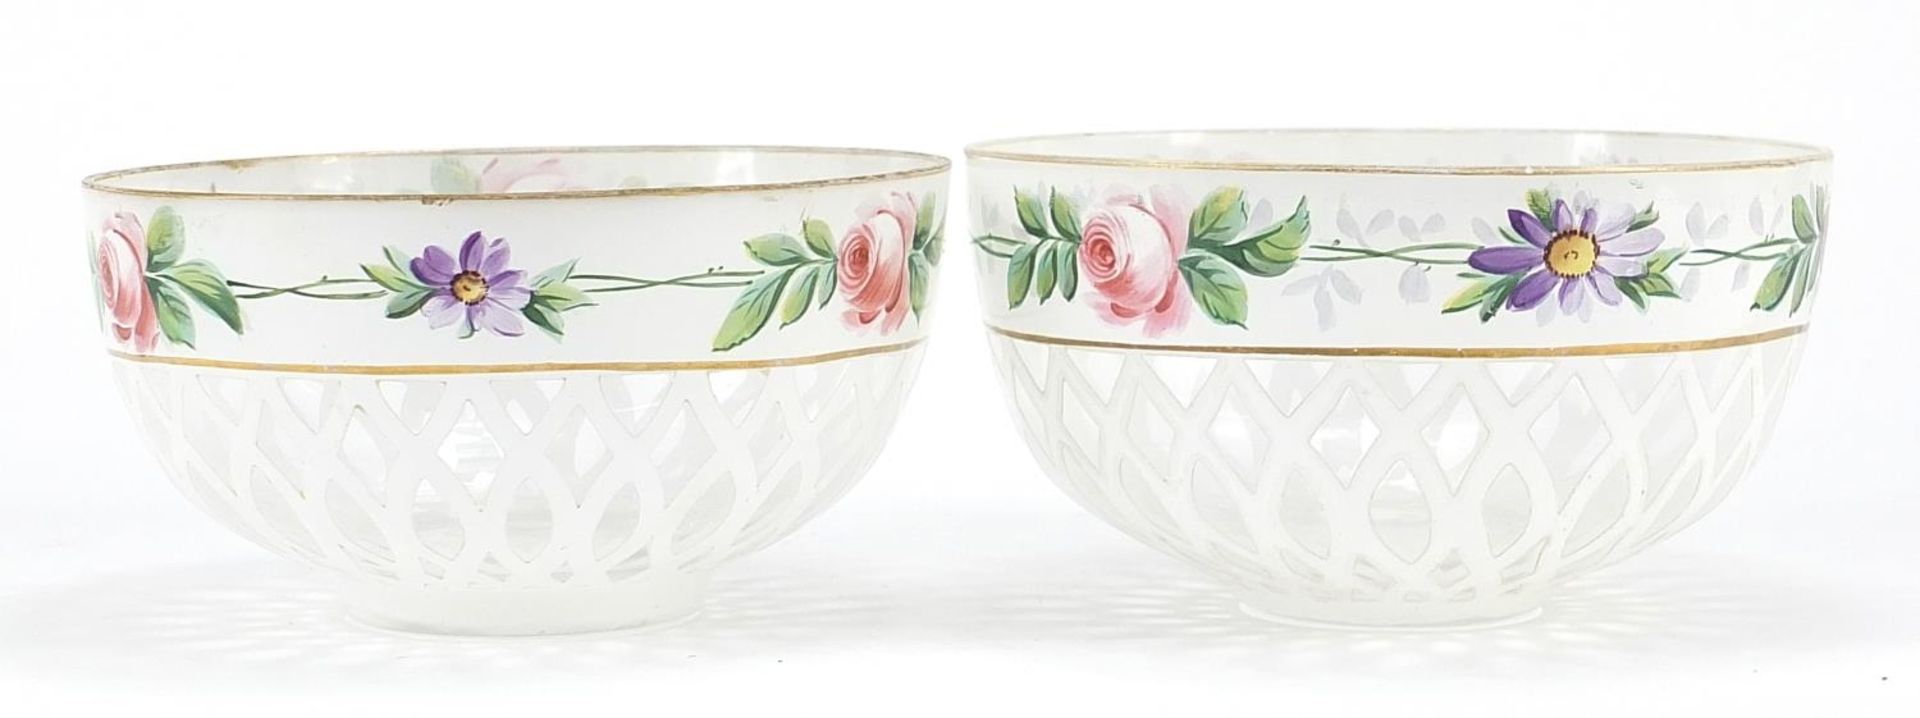 Pair of Bohemian white overlaid glass bowls with saucers, hand painted with flowers, each saucer - Image 2 of 4